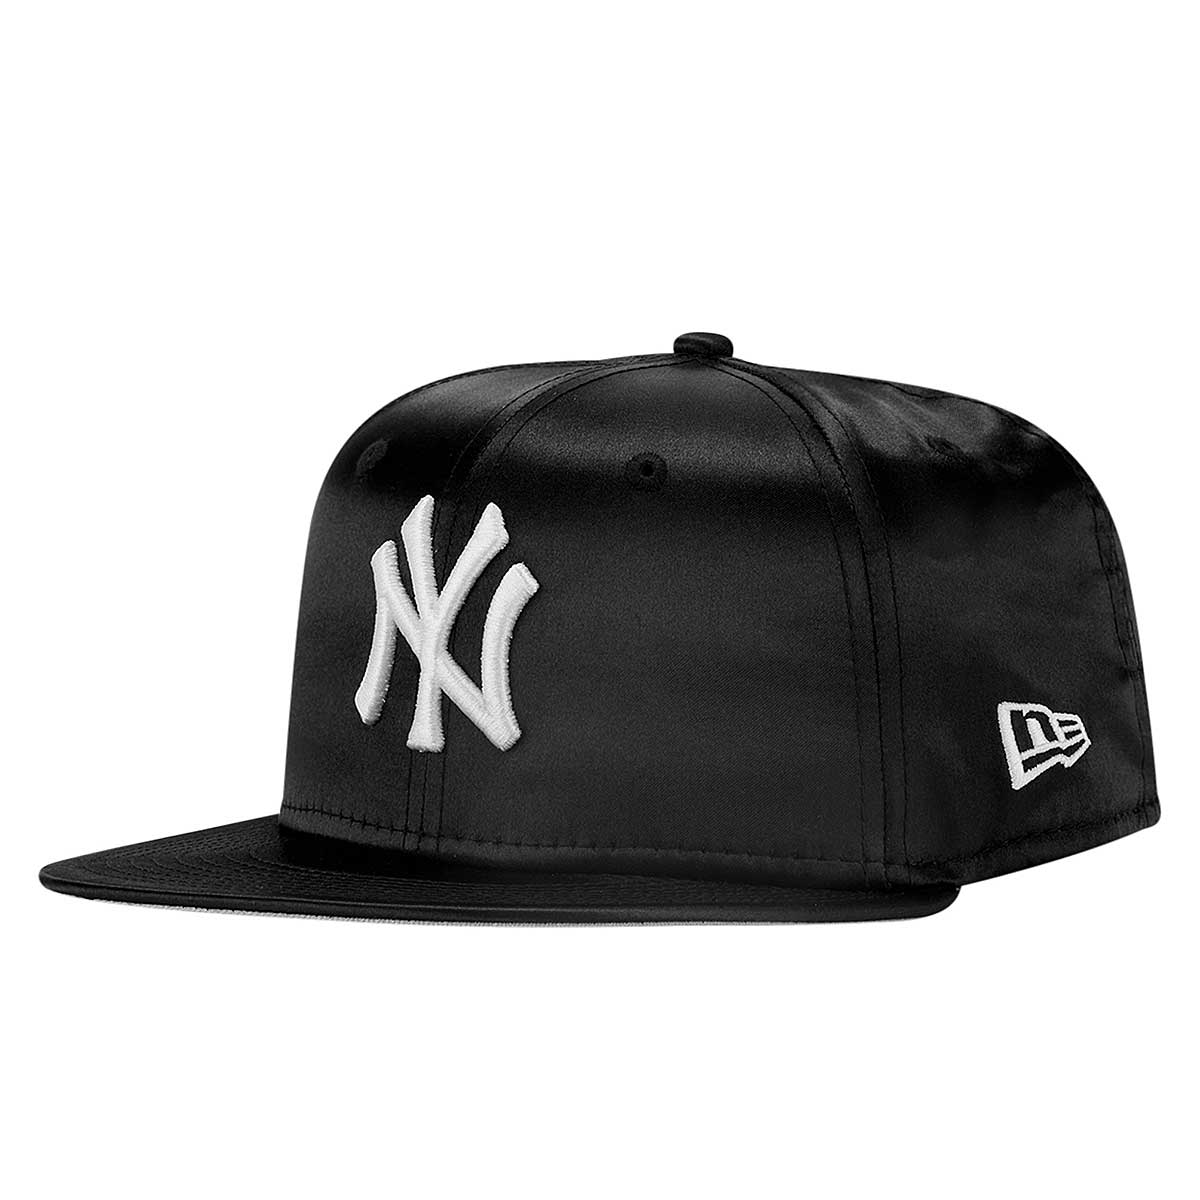 New Era 59Fifty Leather York Yankees Black Fitted Cap